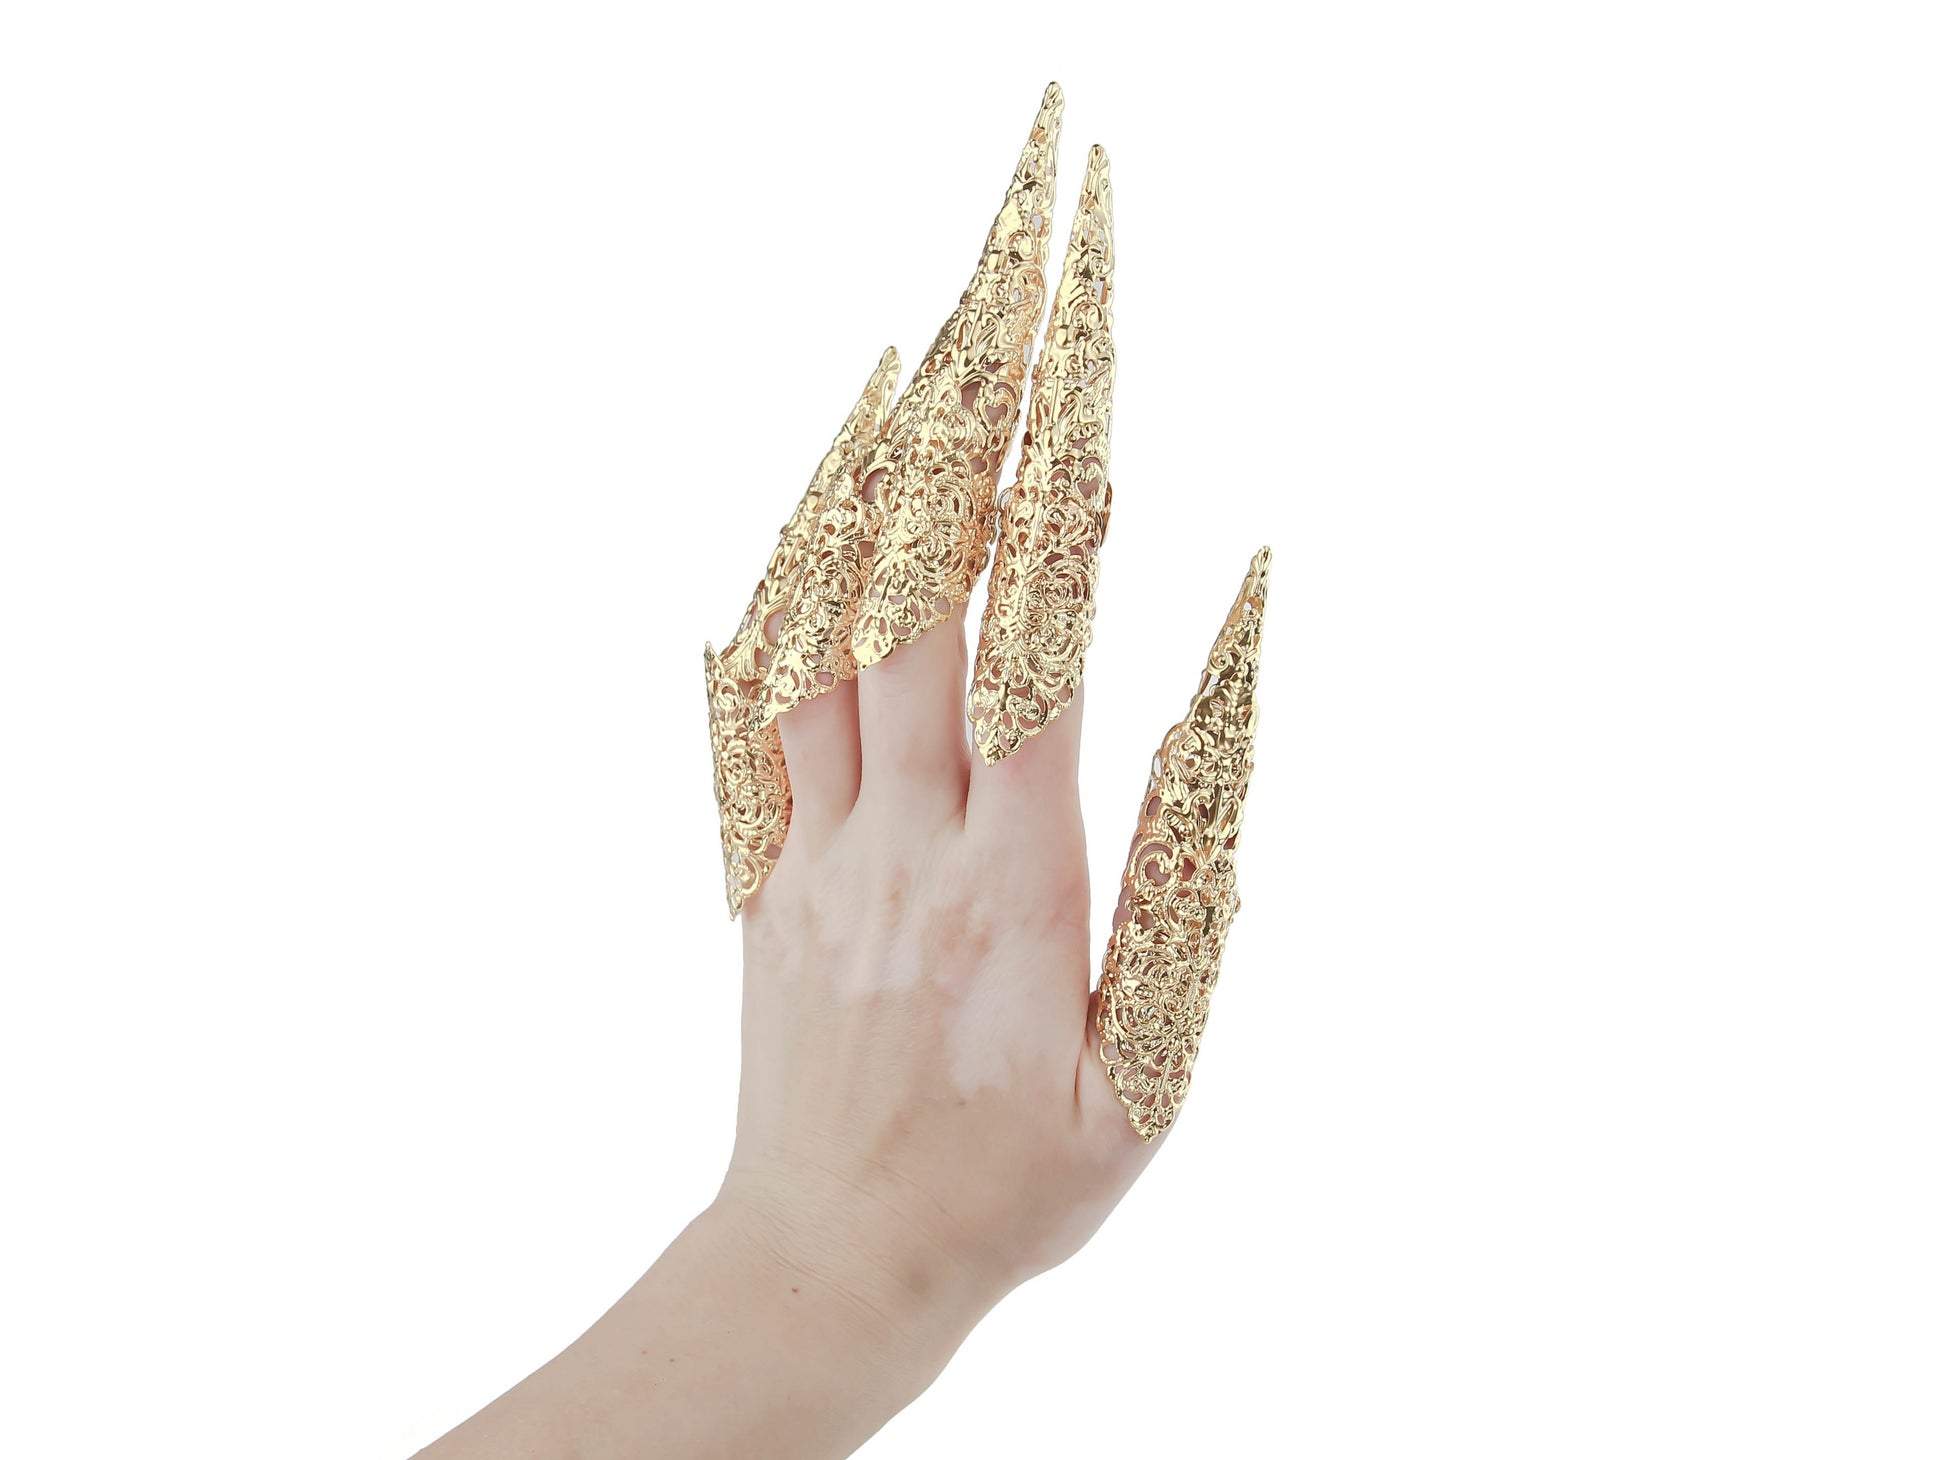 A hand flaunts Myril Jewels' gold midi rings with long claws, embodying dark avant-garde craftsmanship. These unique pieces are perfect for anyone seeking Neo Gothic Jewels, adding a daring touch to both gothic-chic styles and bold festival attire